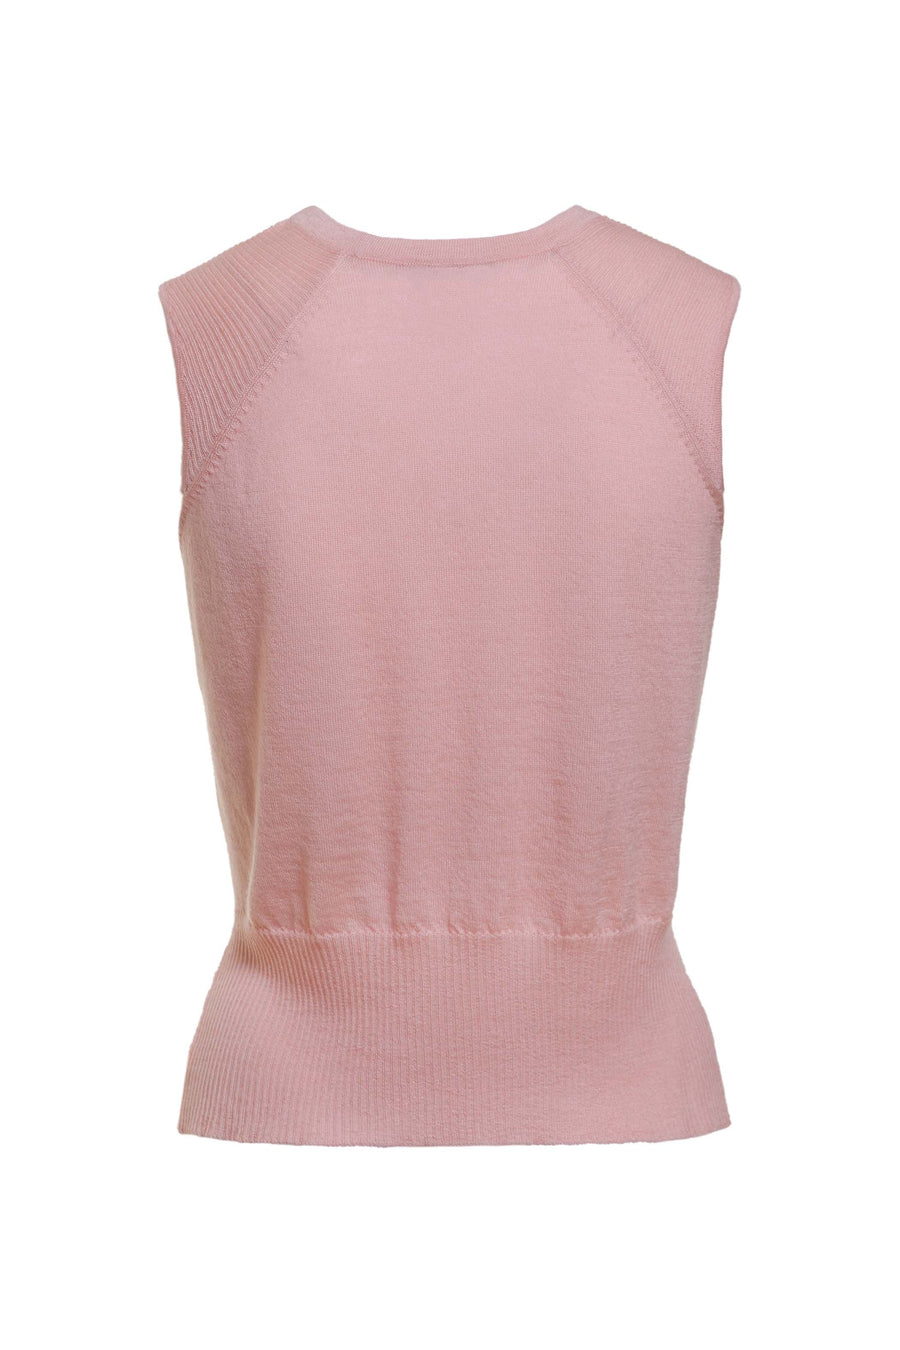 Cashmere Sleeveless Formal Top